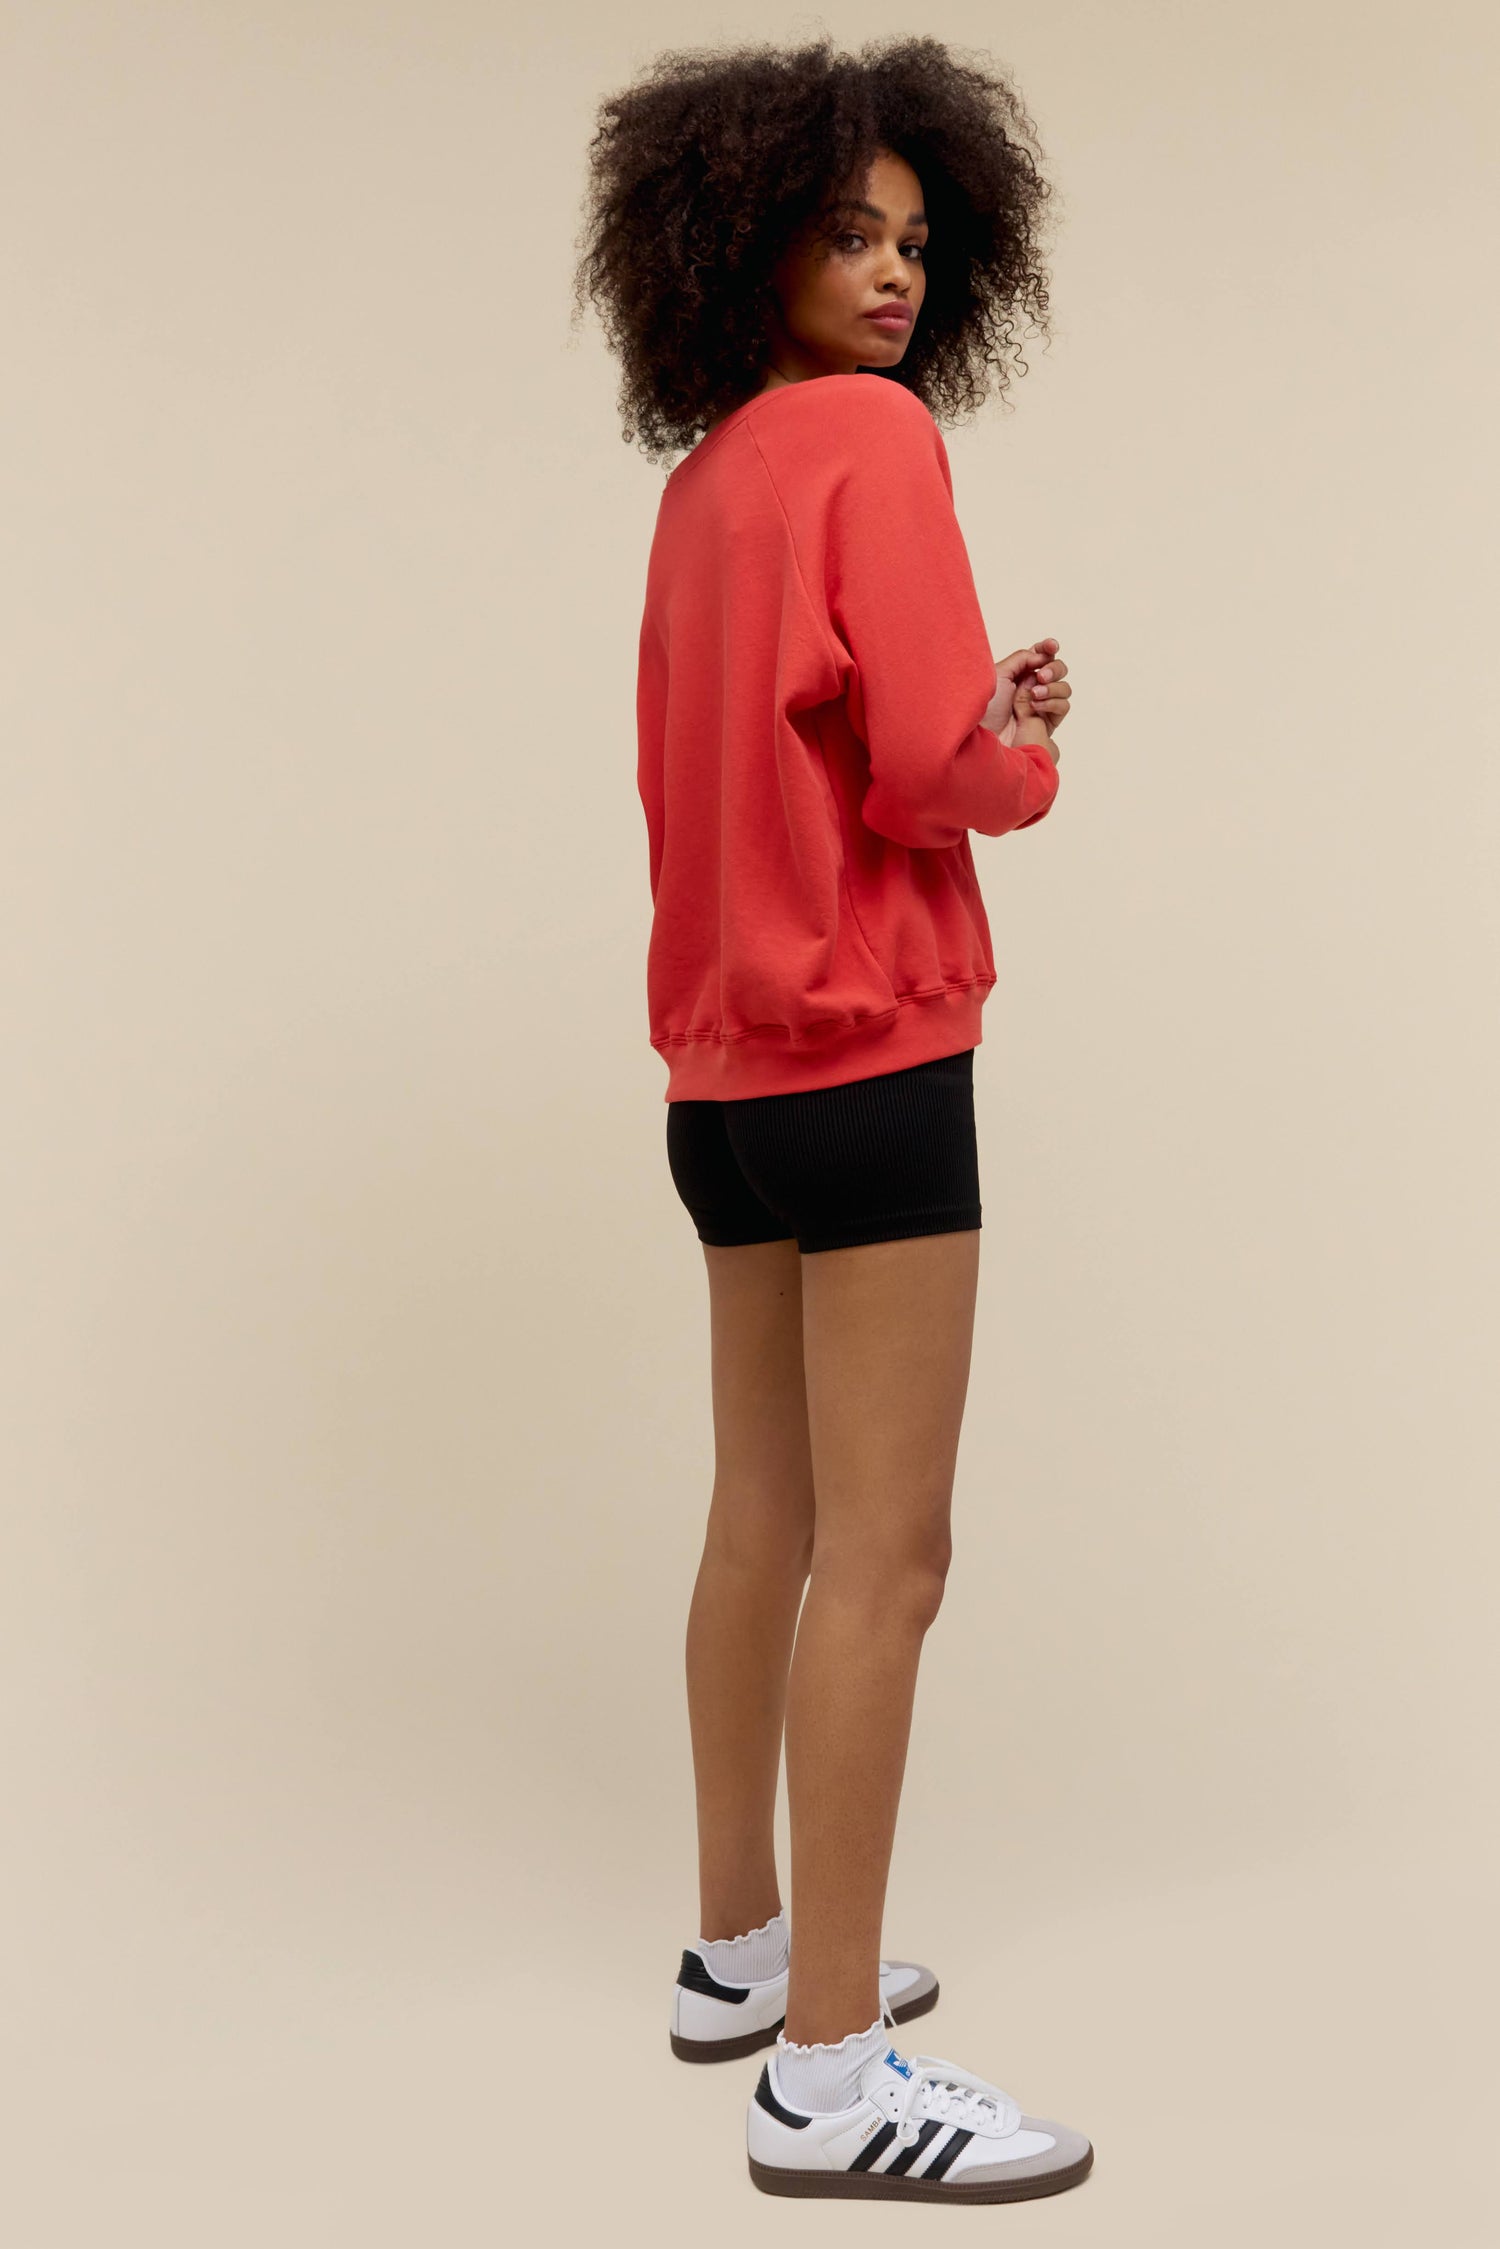 A model featuring a red raglan sweatshirt stamped with Daydreamer in the middle.